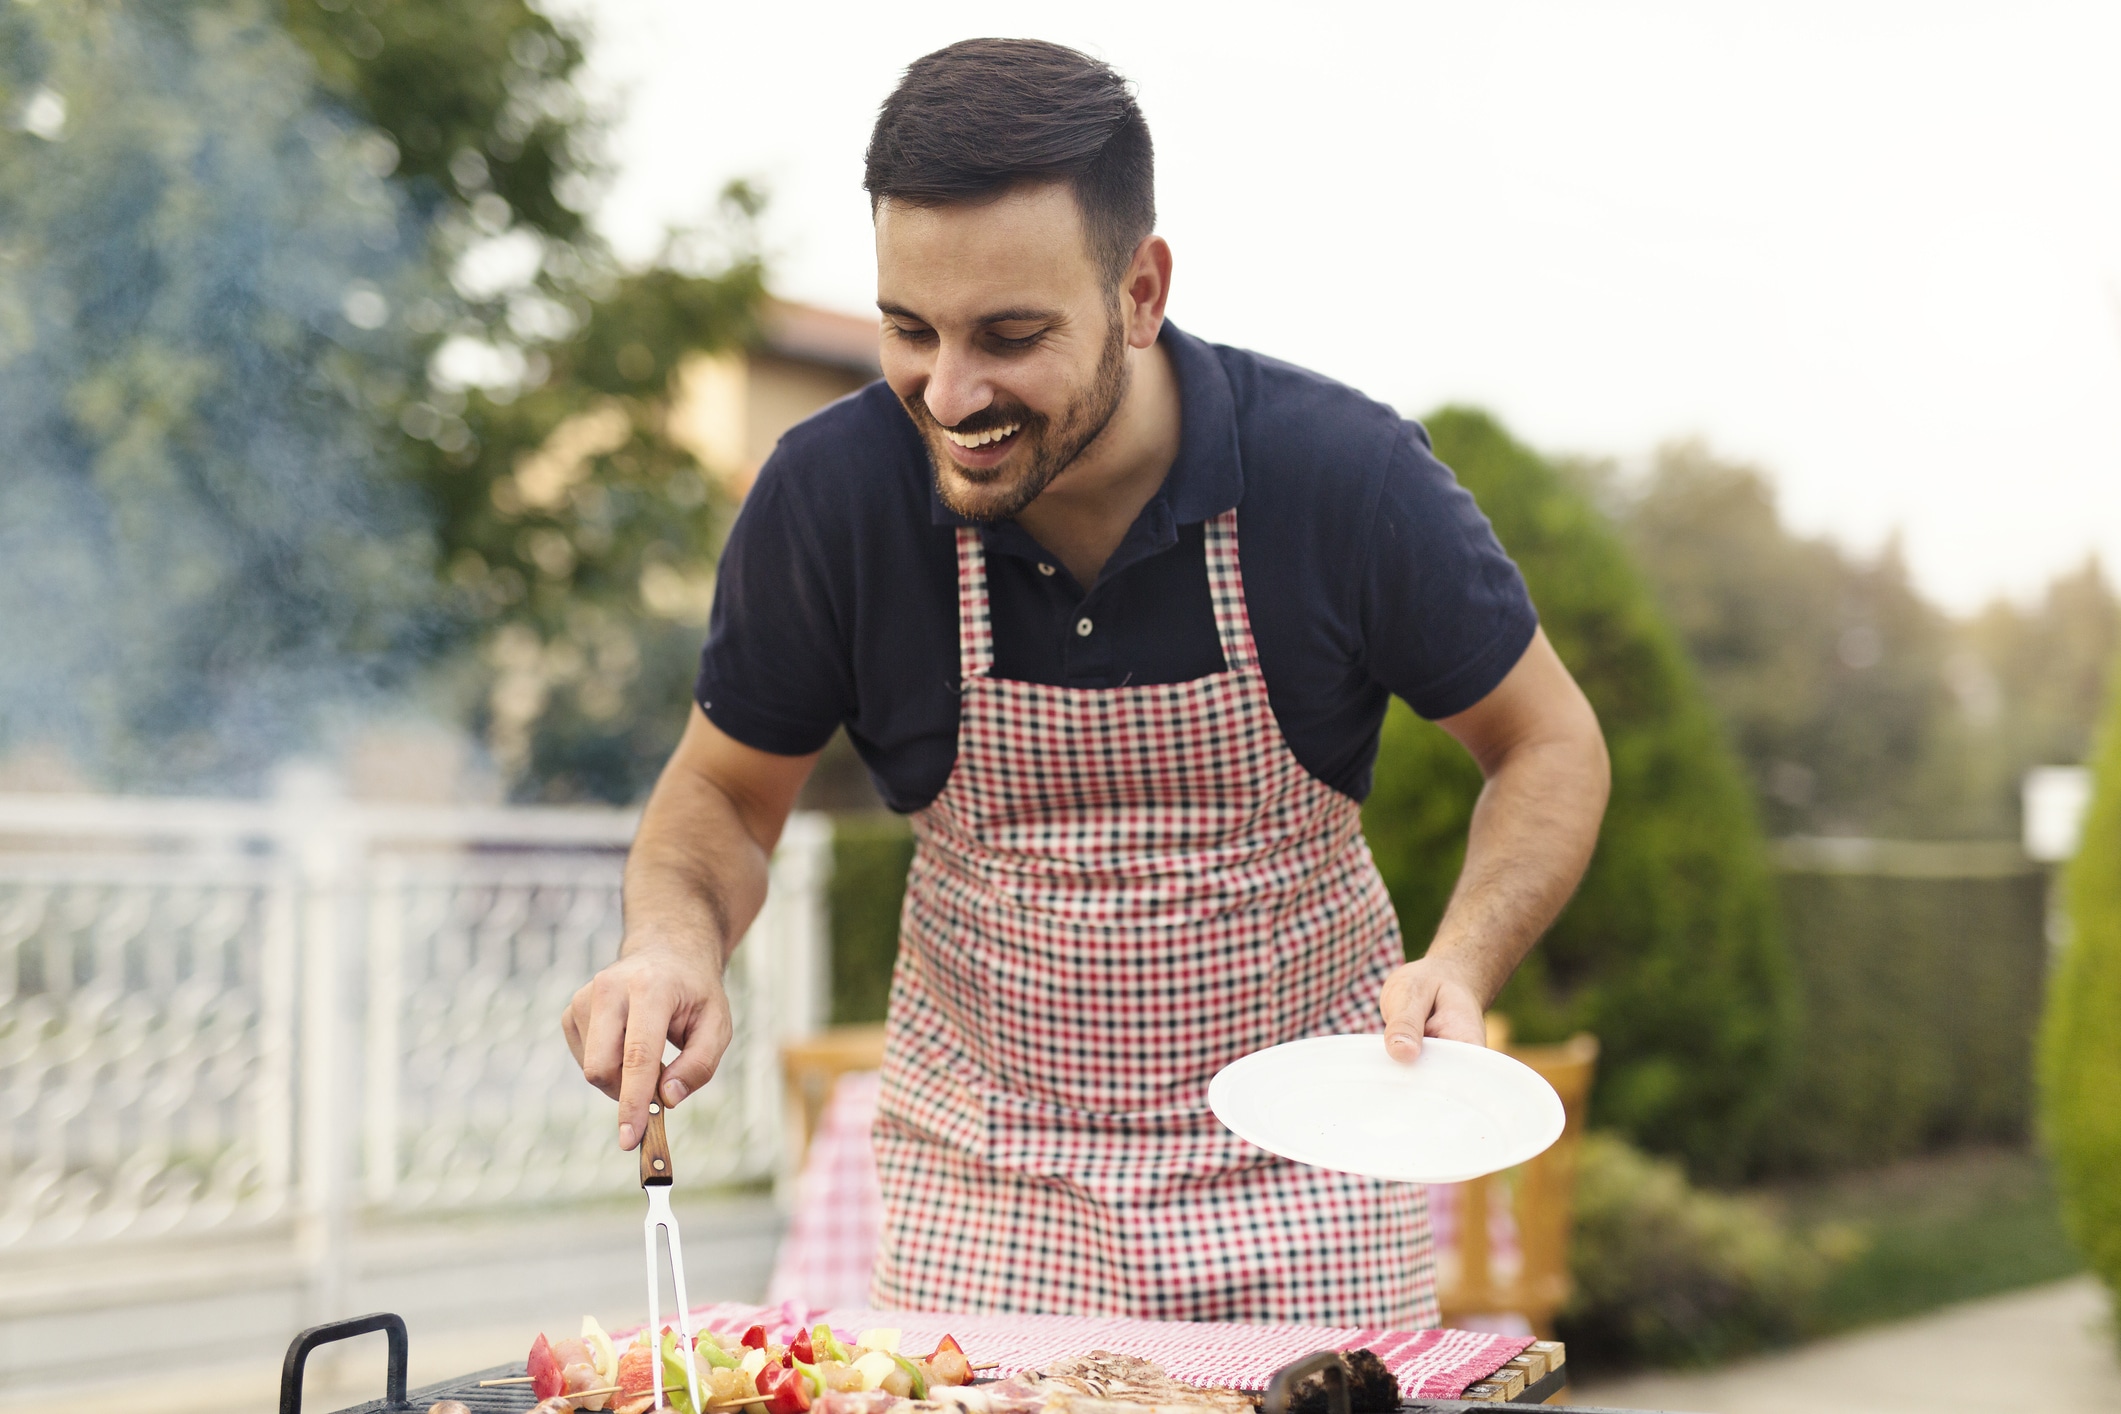 Firing Up The Grill? A Nutritionist’s Guide To Avoiding Hidden Health Hazards